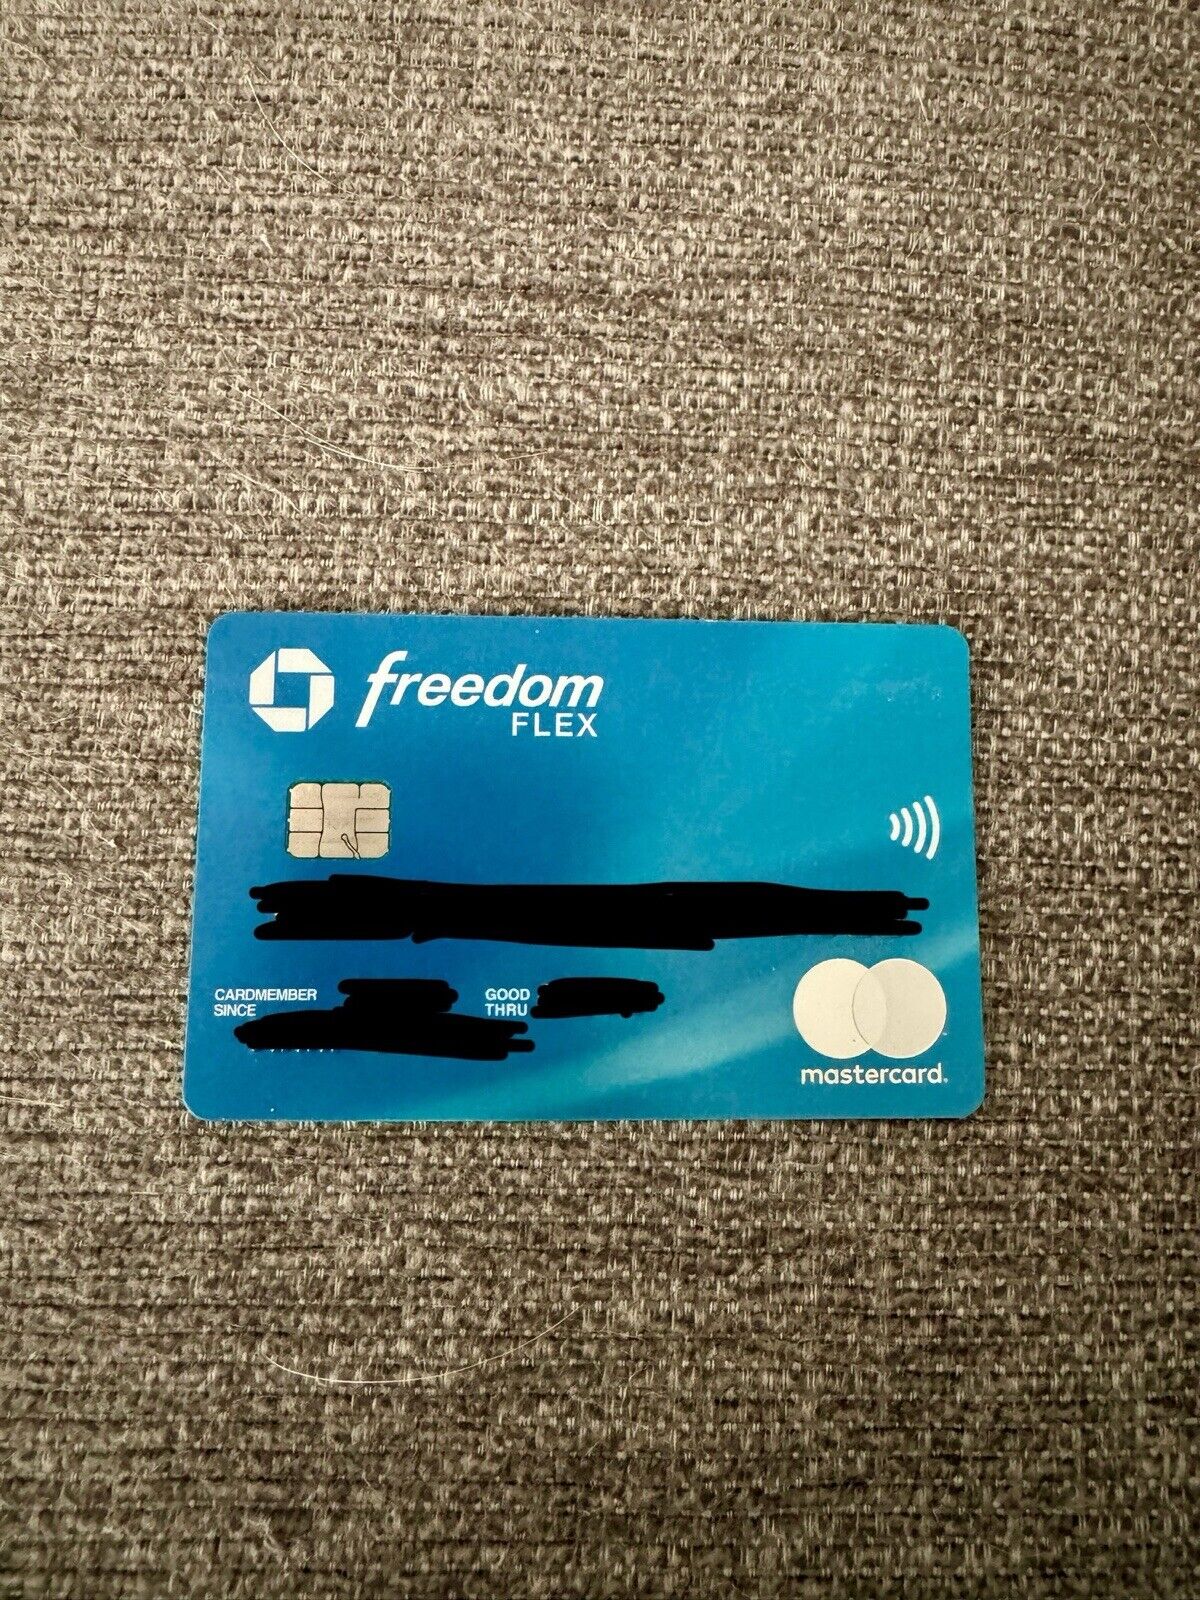 Chase Freedom Flex. Mastercard. Original Credit Card. Cancelled. Collectible